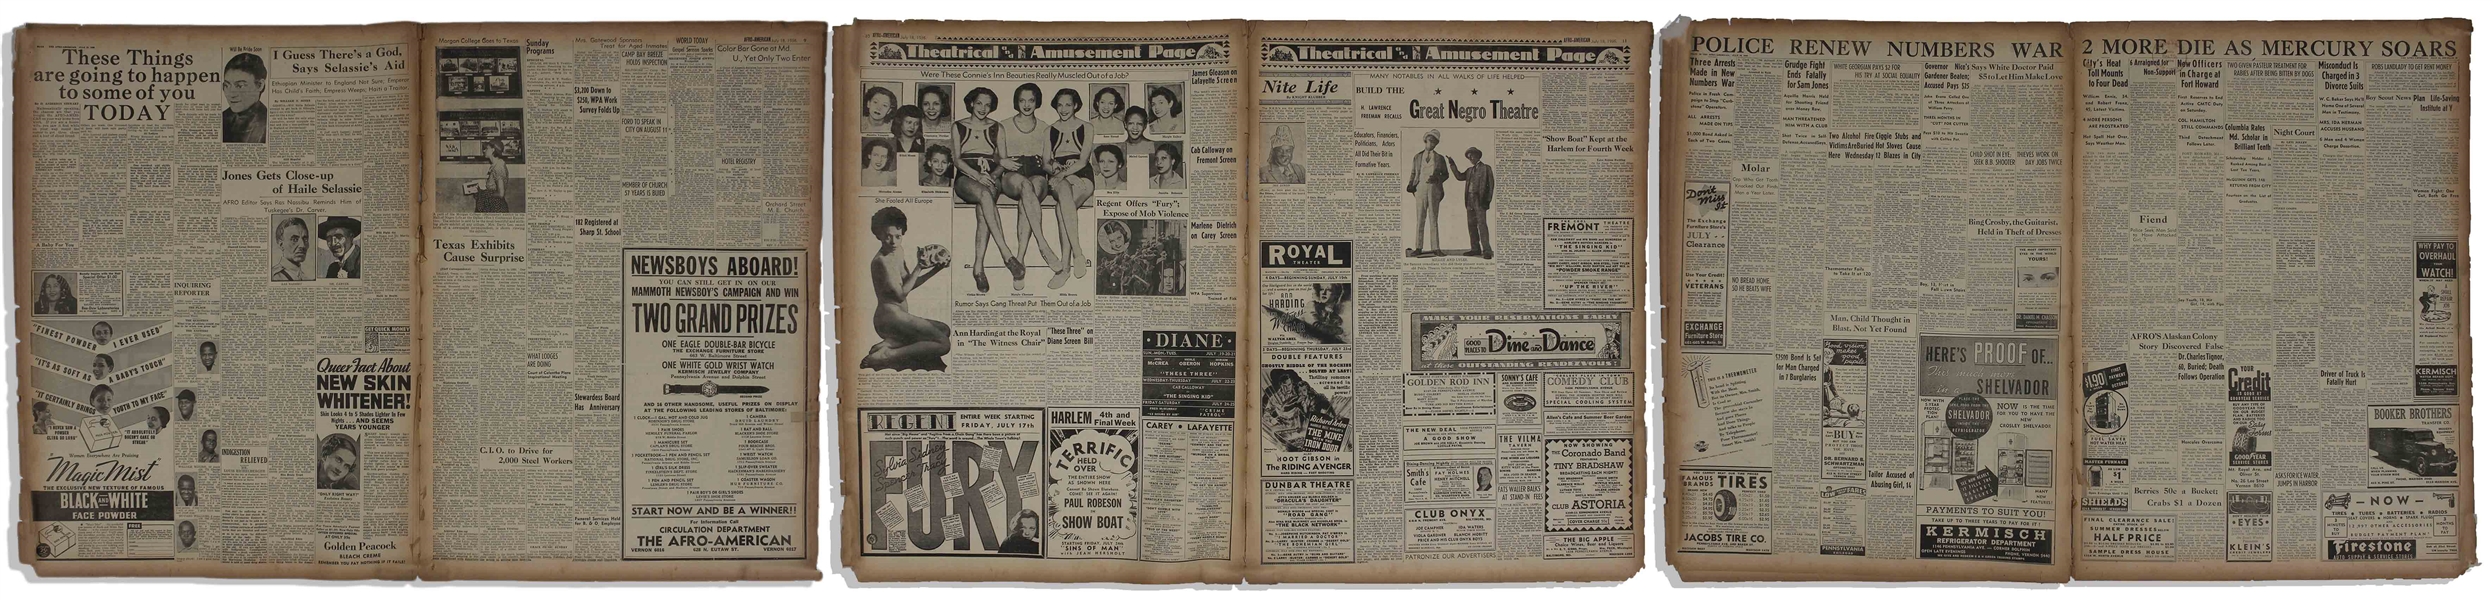 ''The Afro-American'' Newspaper From July 1936 -- ''17 ATHLETES SAIL FOR BERLIN'' in Red At Top of Front Page